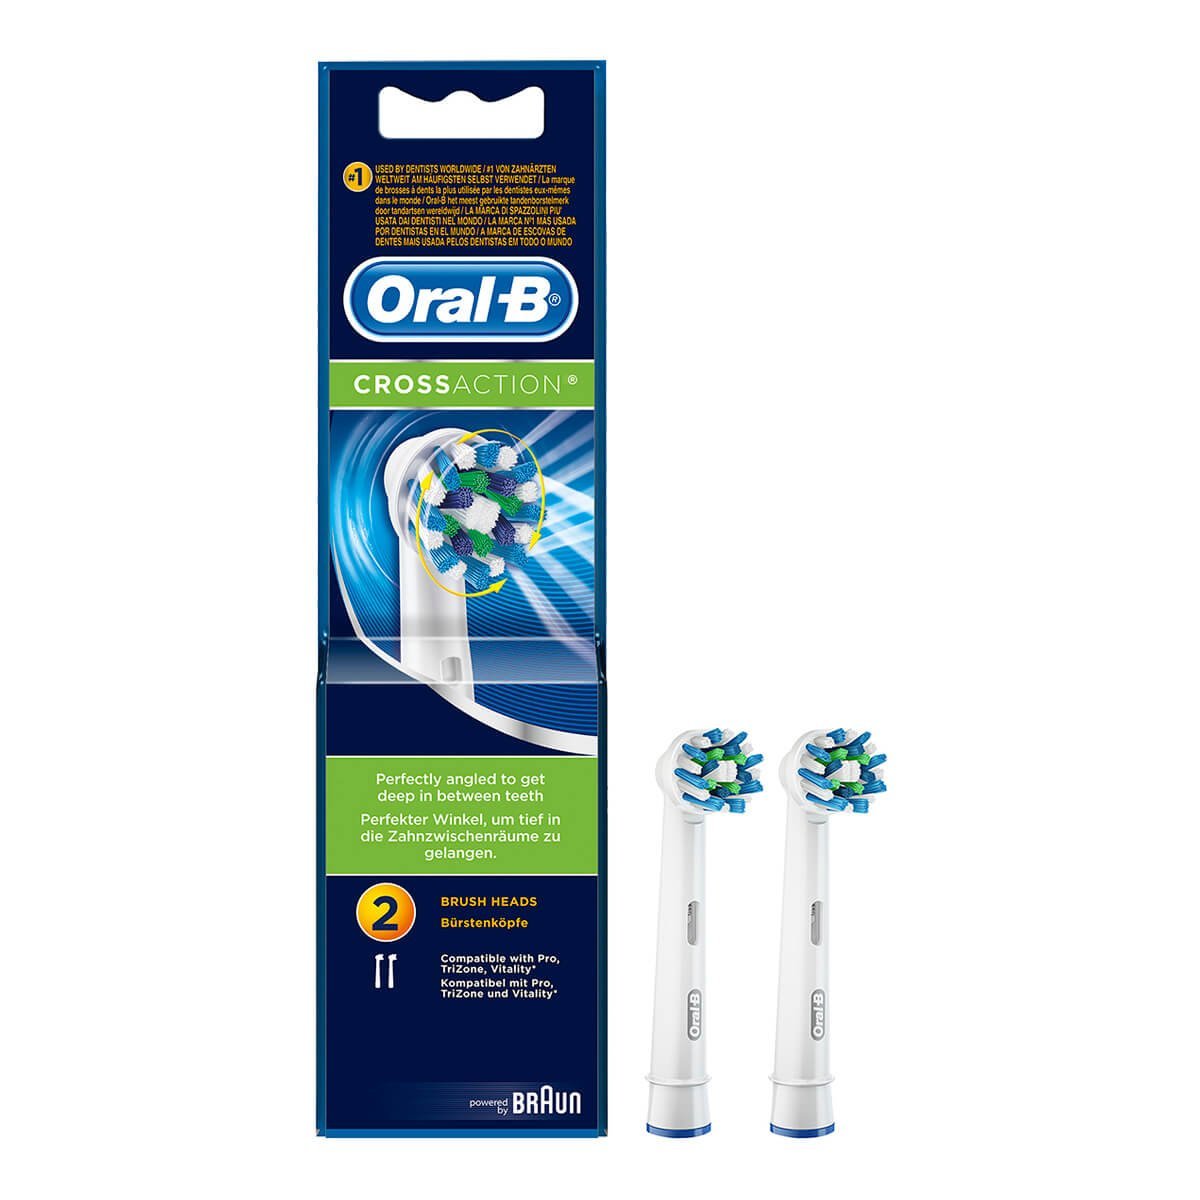 Oral-B Crossaction Replacement Heads - 2 Toothbrush Heads - Bloom Pharmacy